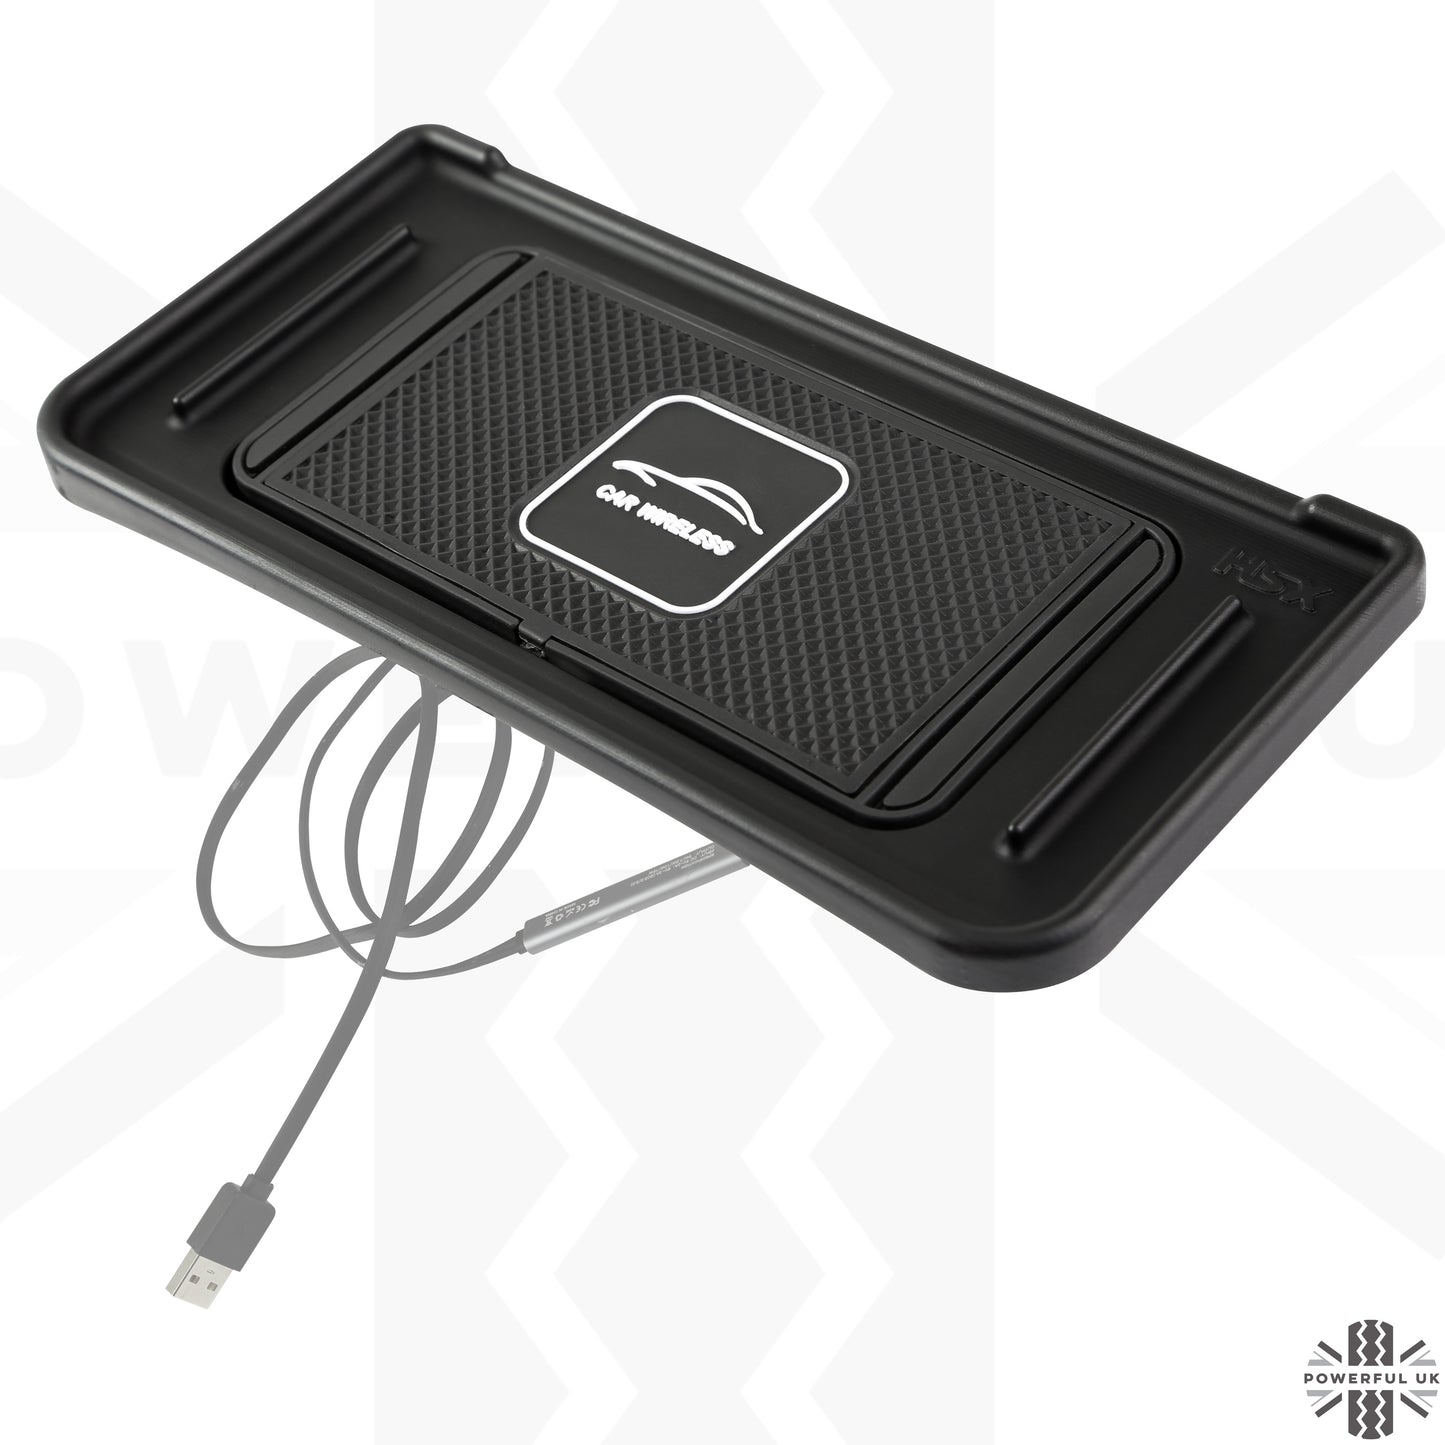 Wireless Phone Charging Kit for Land Rover Discovery 4